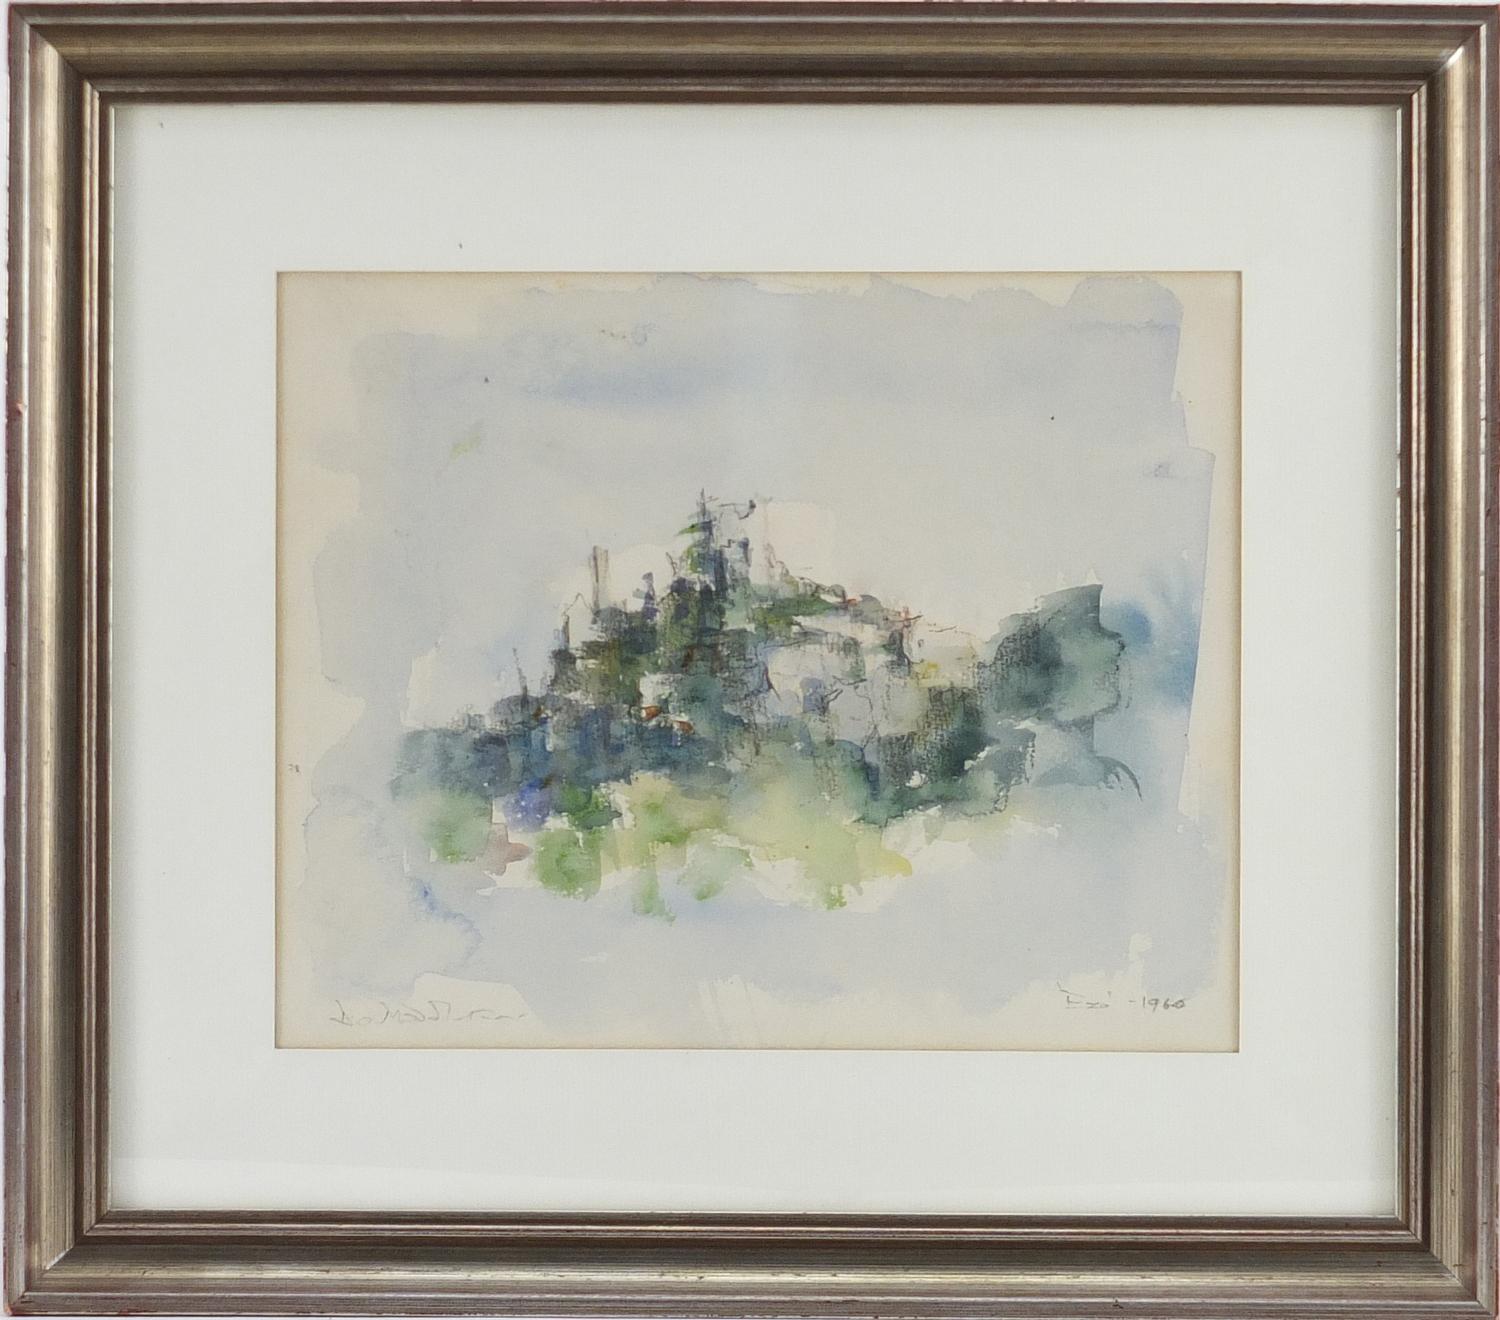 Derek Middleton 1960 - Eze Cote D'Azur, watercolour, inscribed verso, mounted and framed, 26cm x - Image 2 of 7